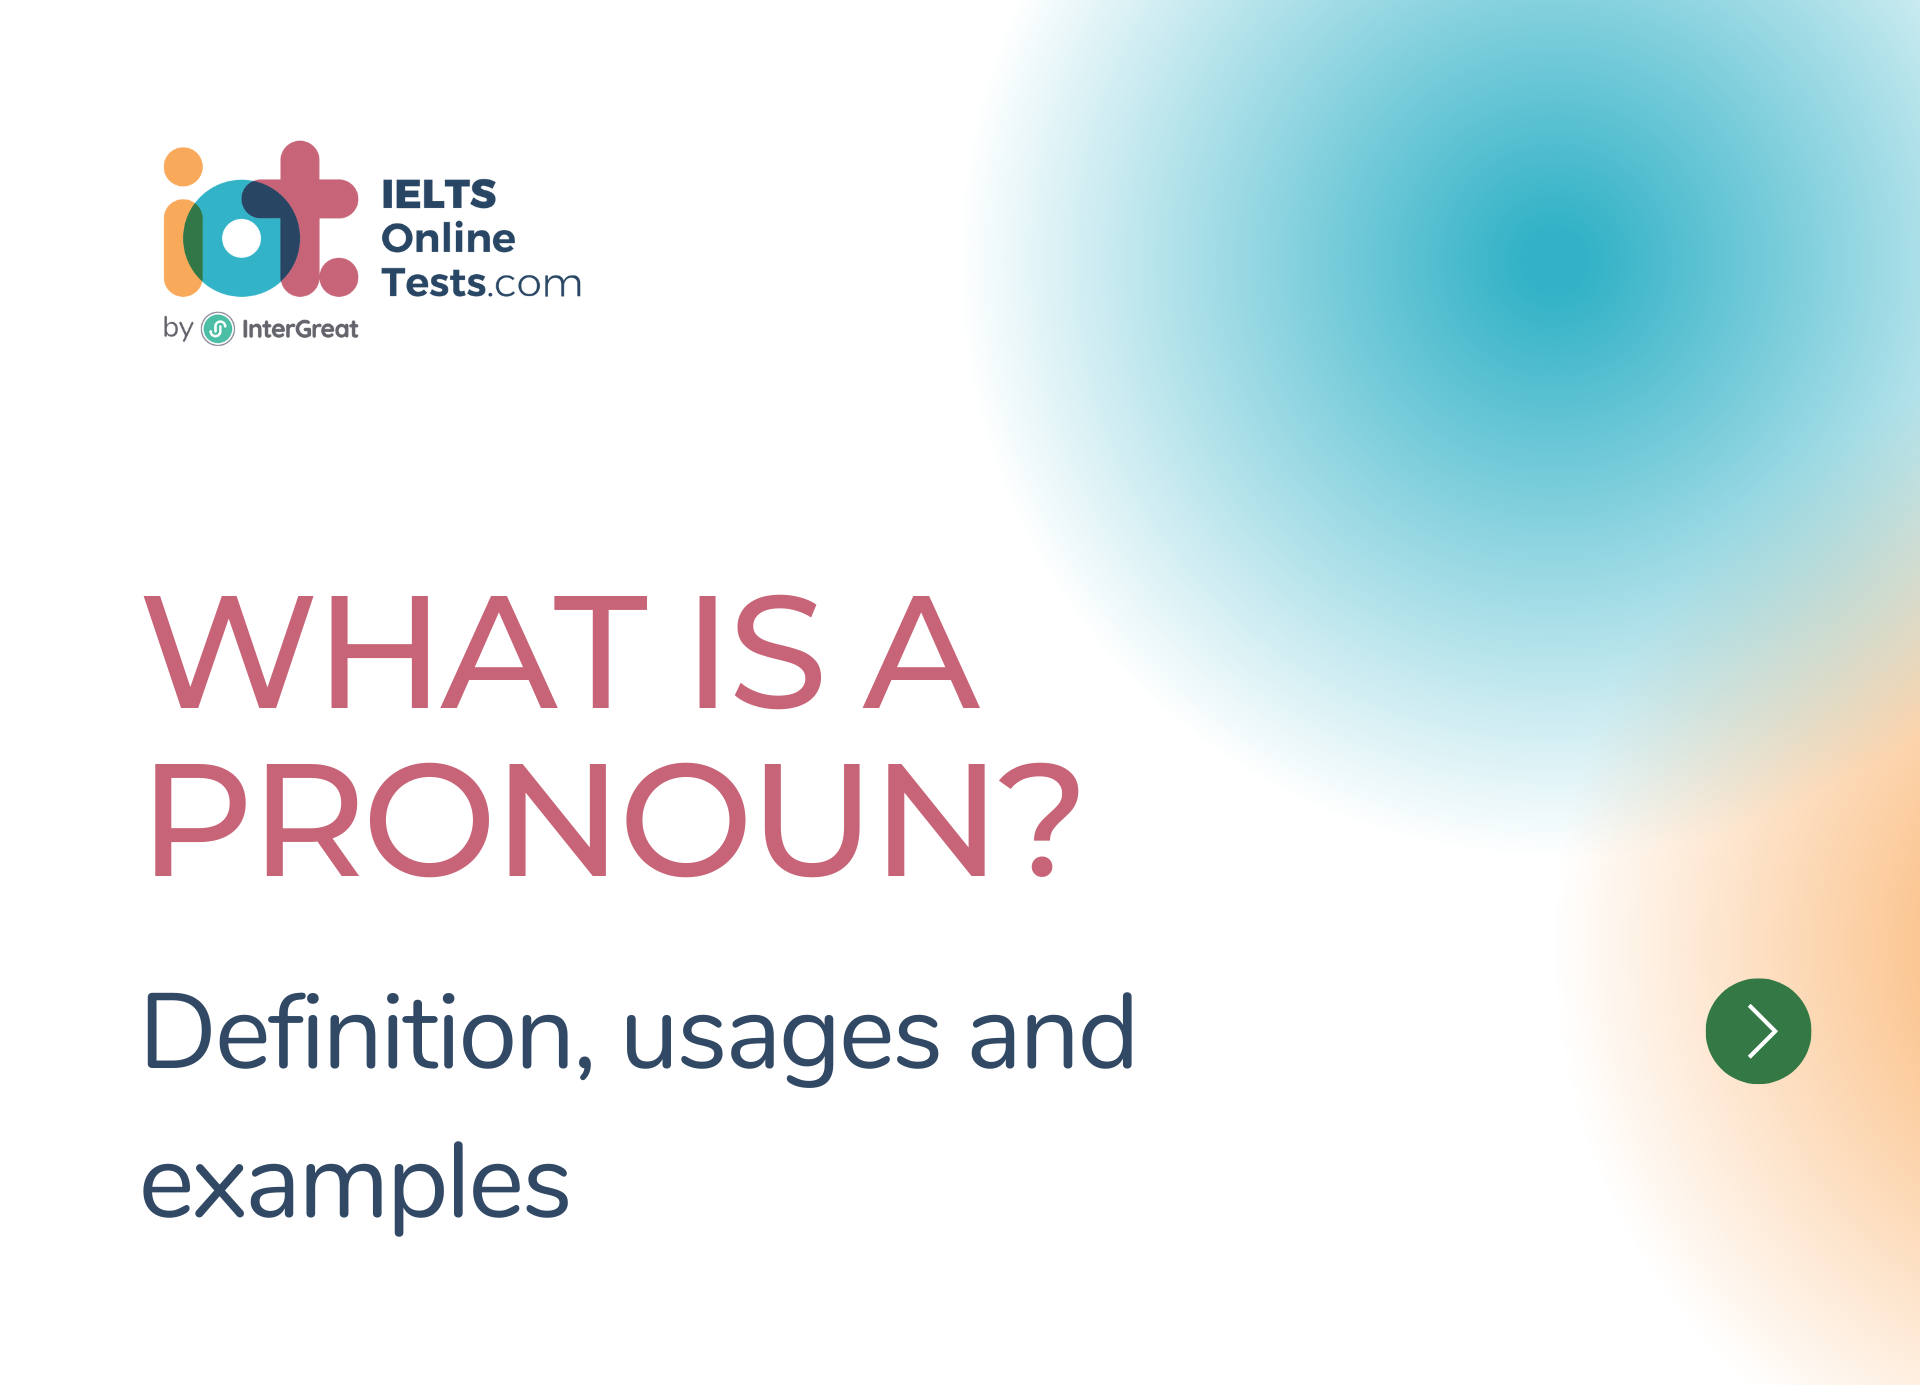 What is a pronoun? How many types does it have?